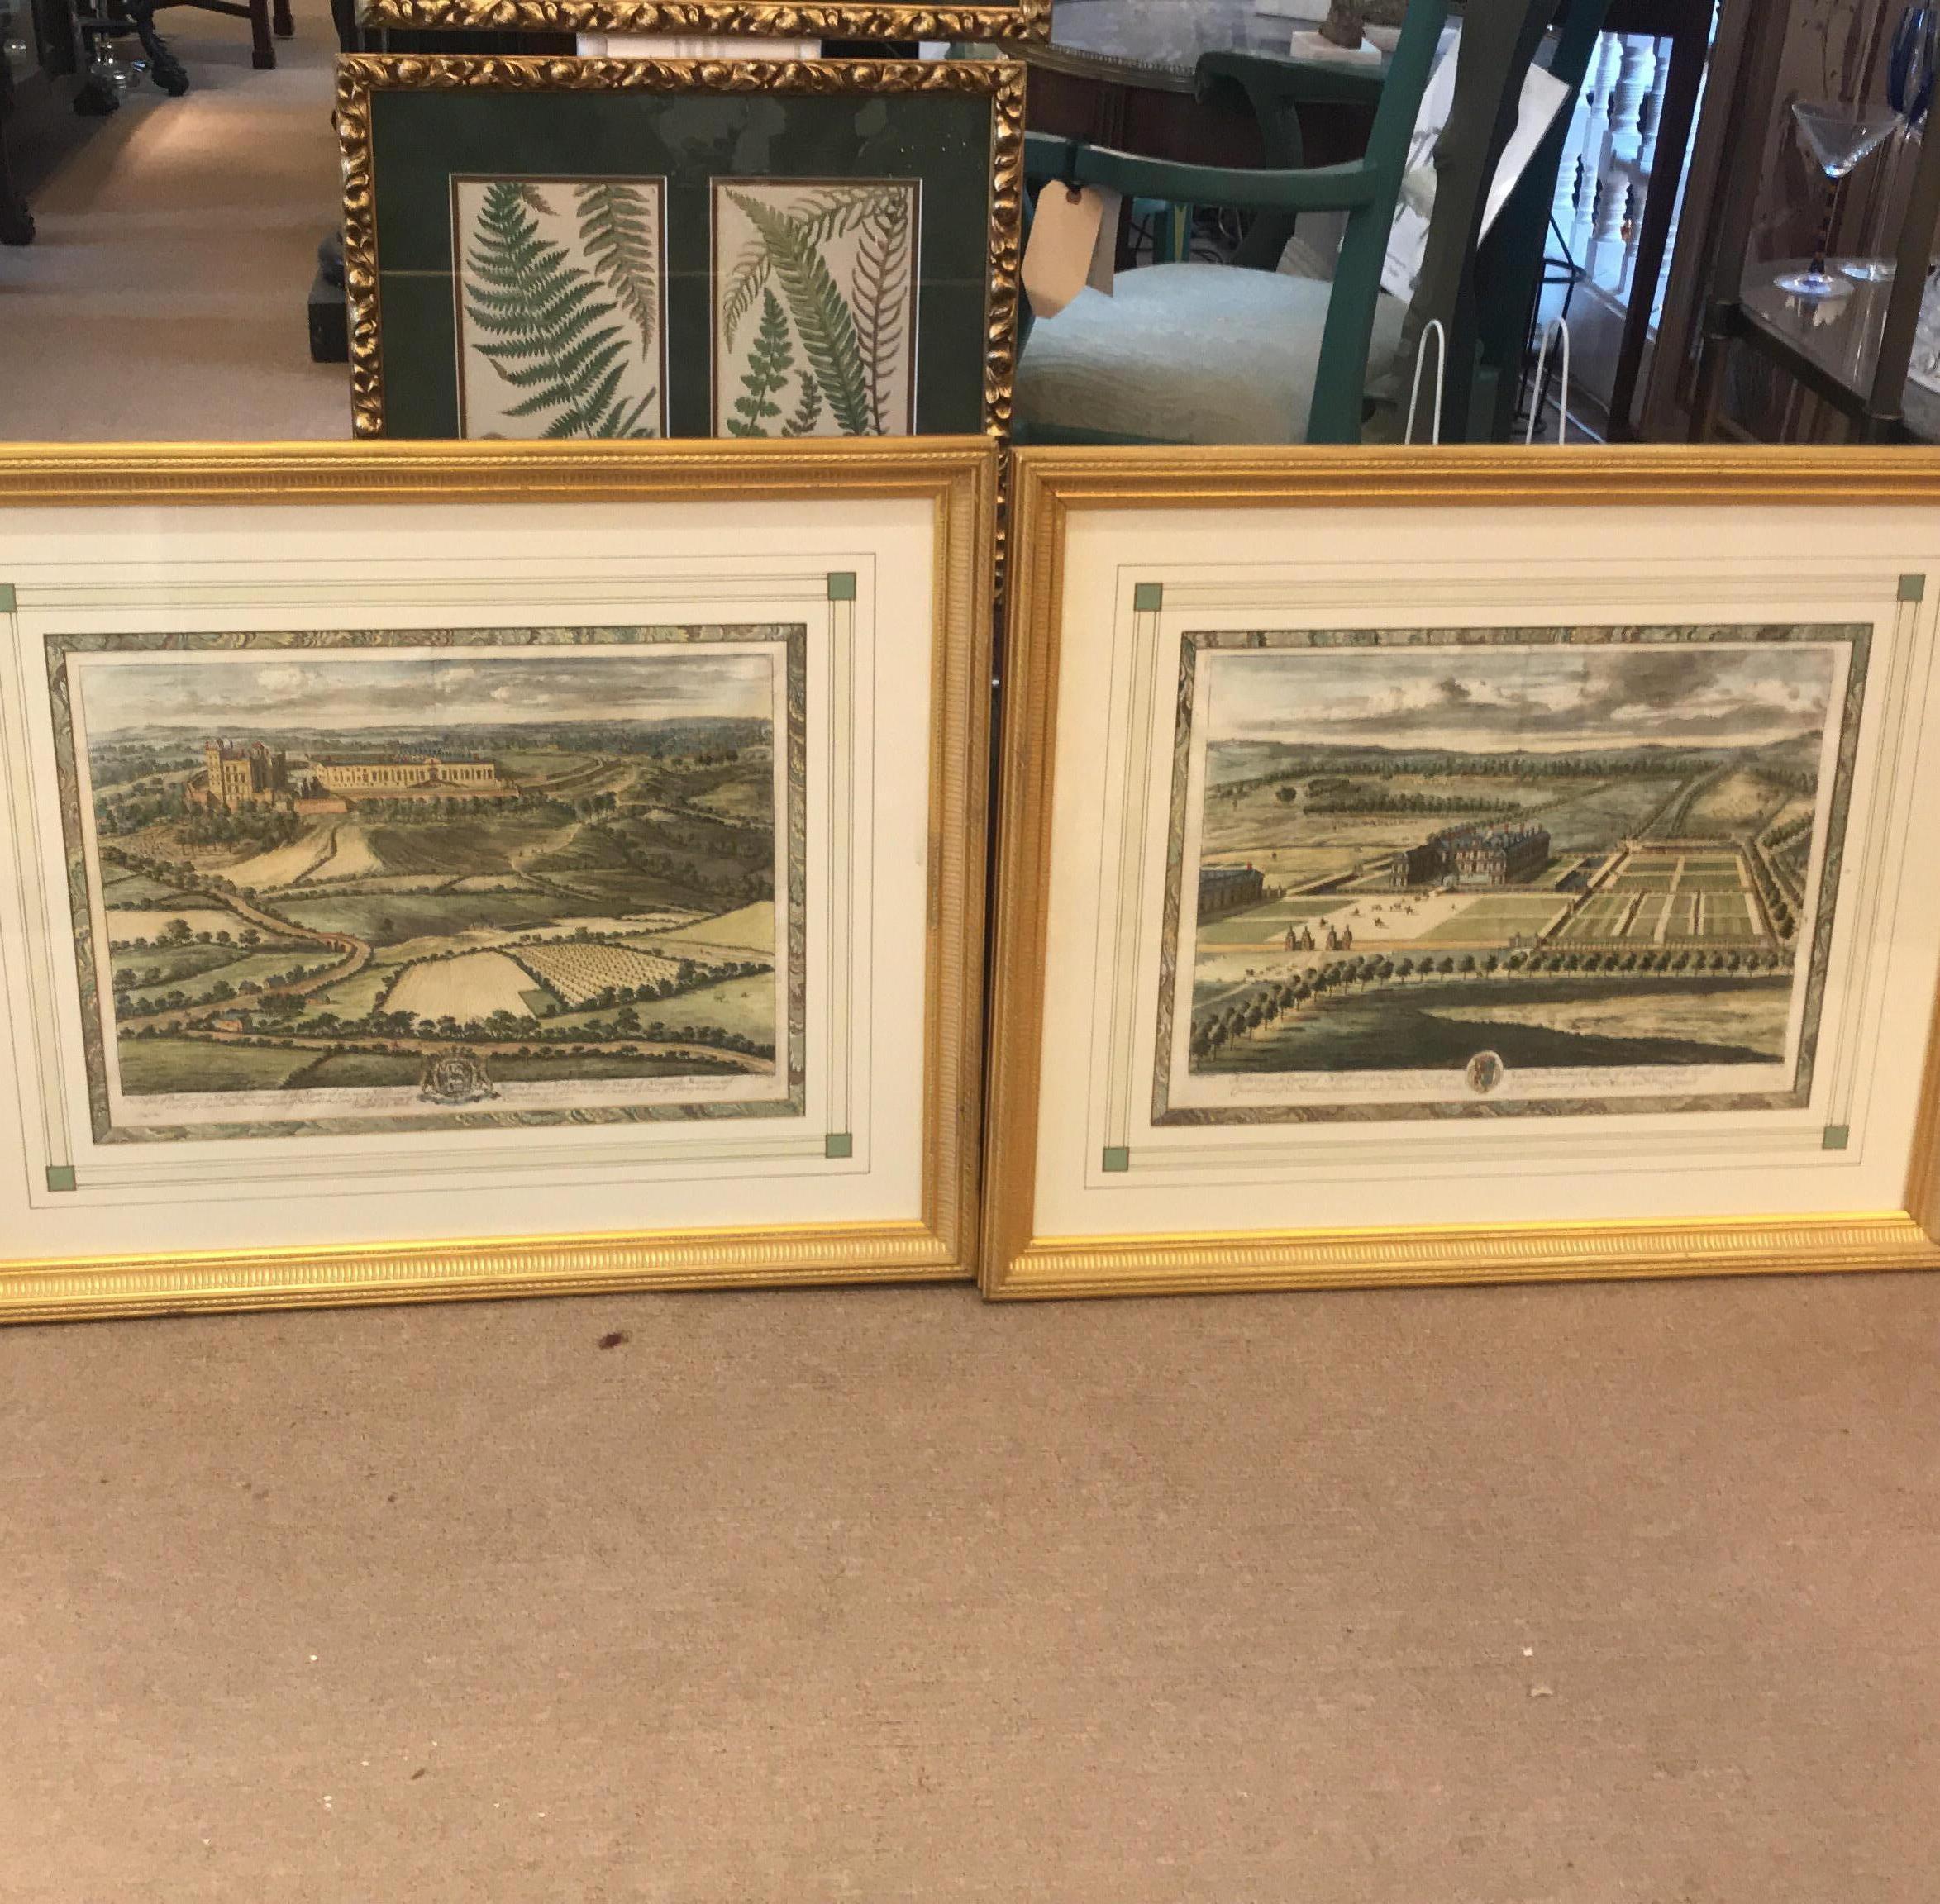 A pair of early 18th century hand colored copper engravings from the Britannia Illustrata of spectacular views of the Queens Palaces, printed during the Queen Anne Period. 1707-1709 Each one with giltwood frames with hand decorated French matting